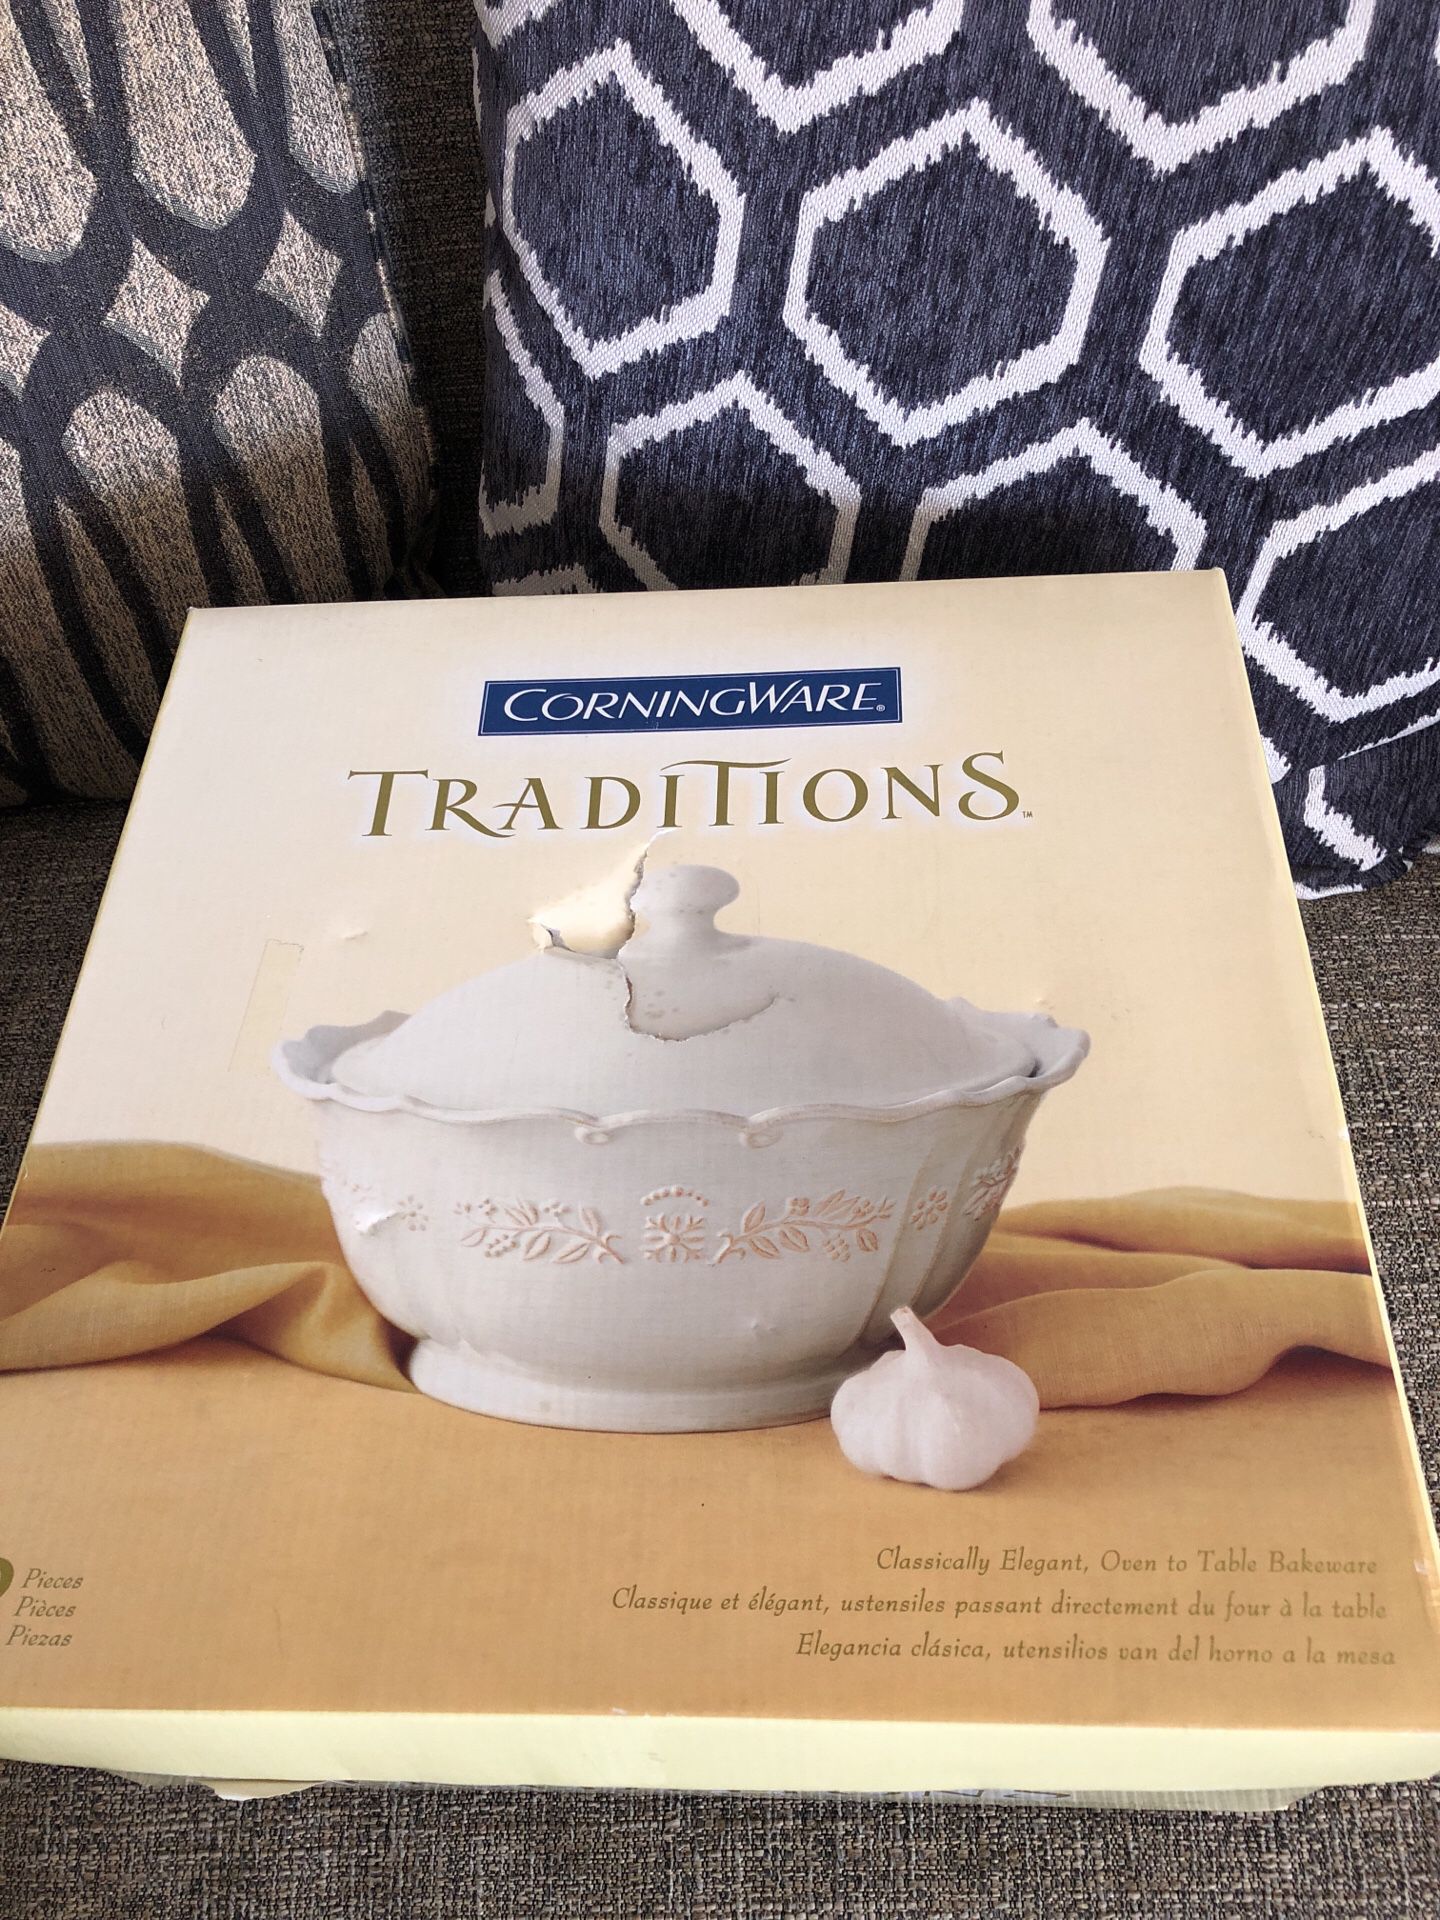 CorningWare Traditions Stoneware. Please see all the pictures and read the description